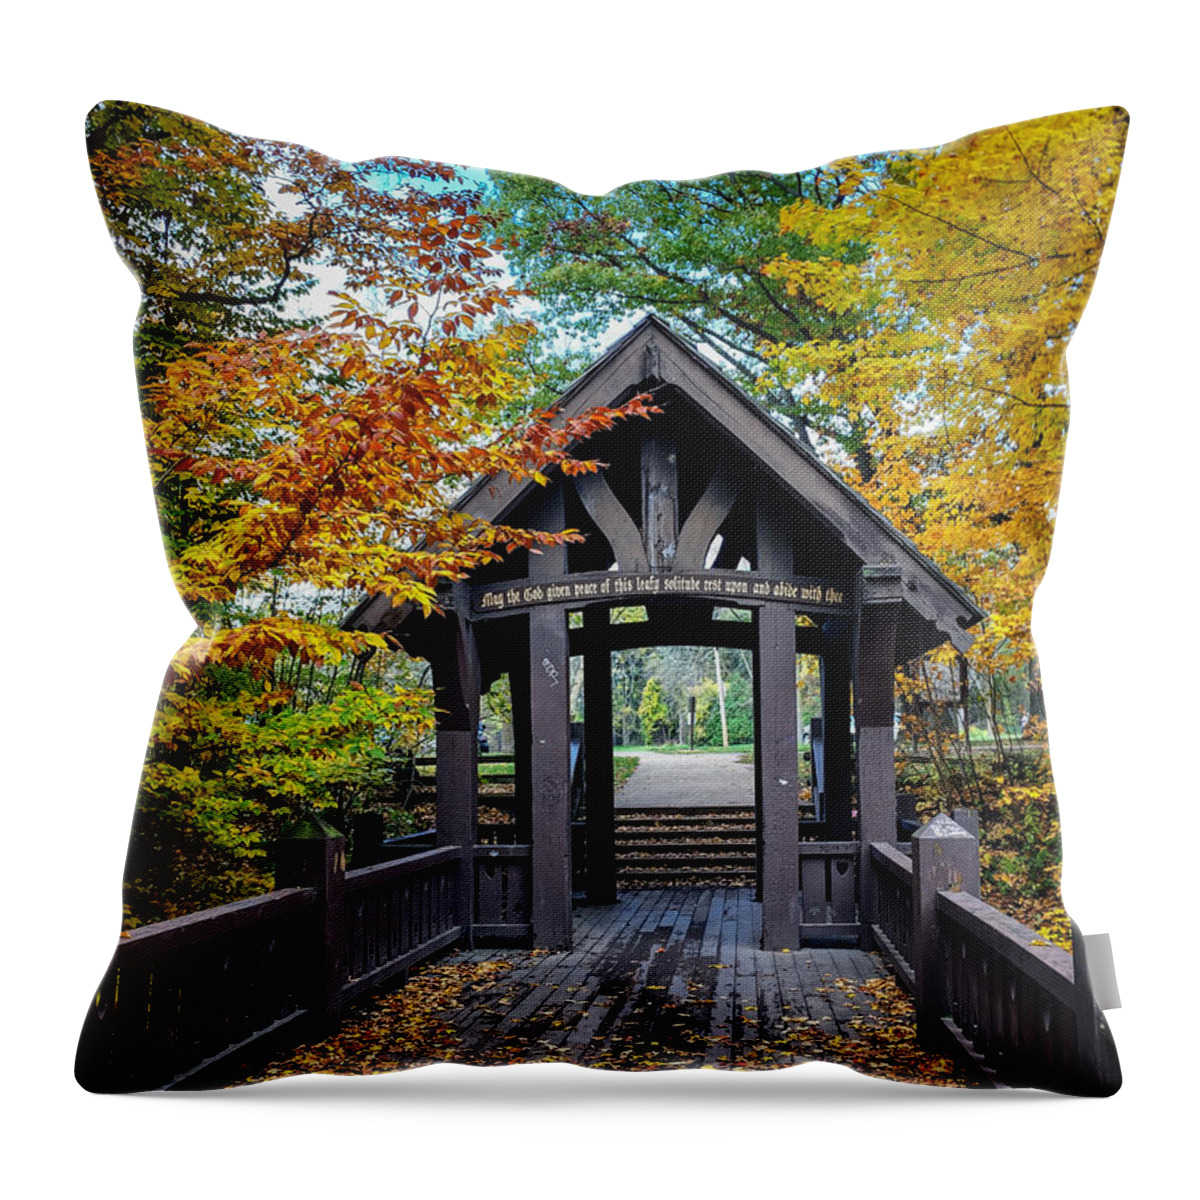 Grant Park Milwaukee Throw Pillow featuring the photograph 7 Bridges Aflame by Kristine Hinrichs